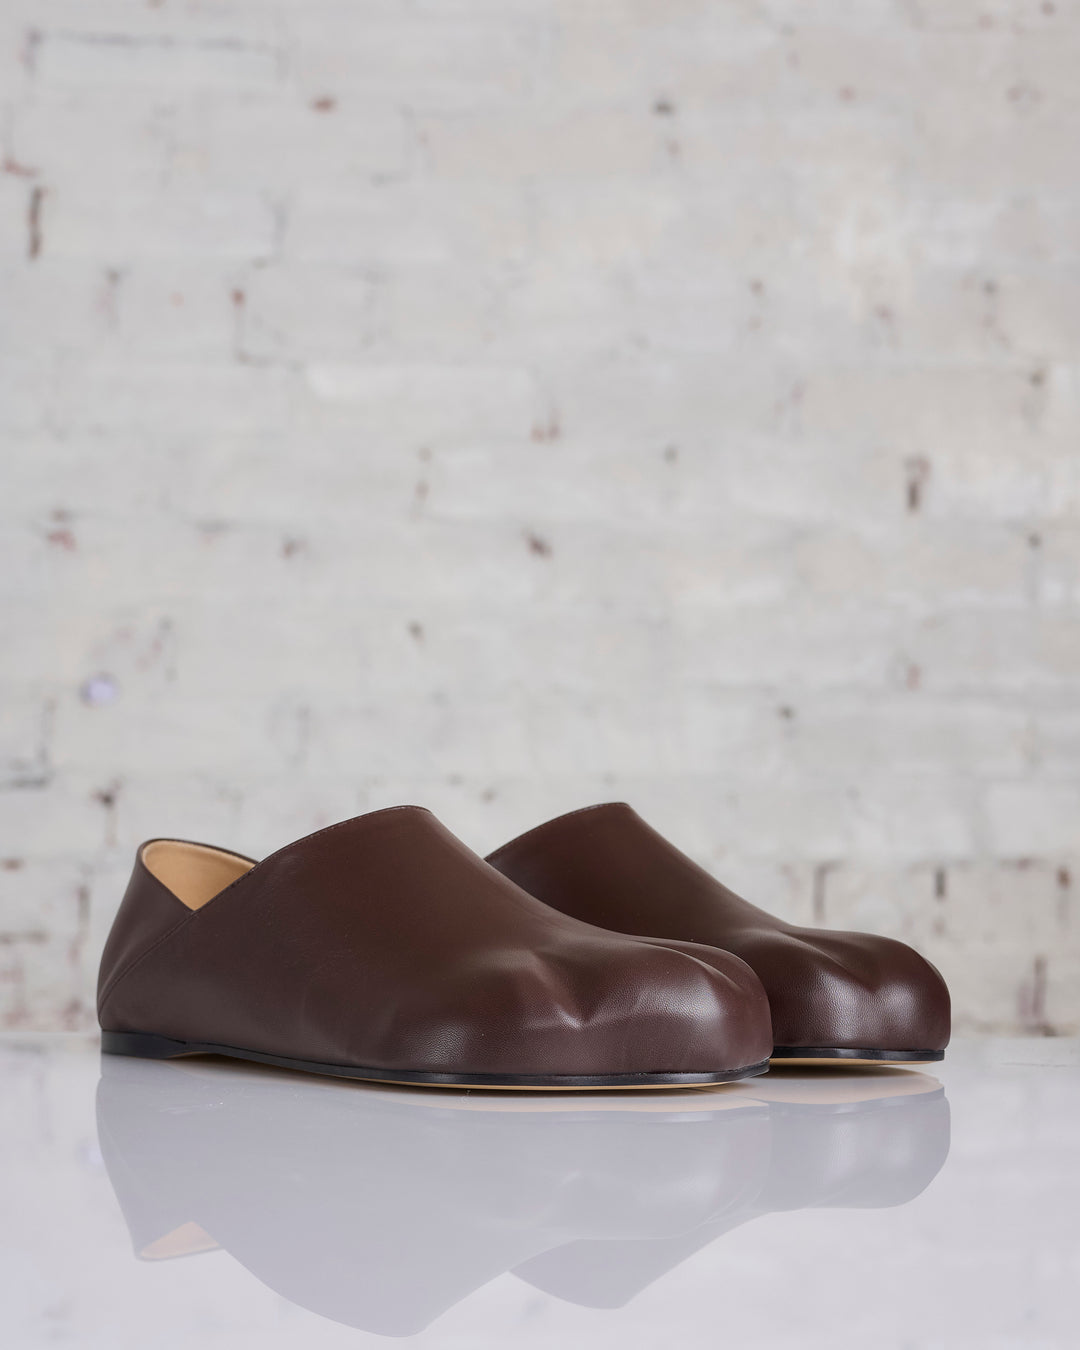 JW Anderson Paw Loafer Nappa Lux Leather Brown